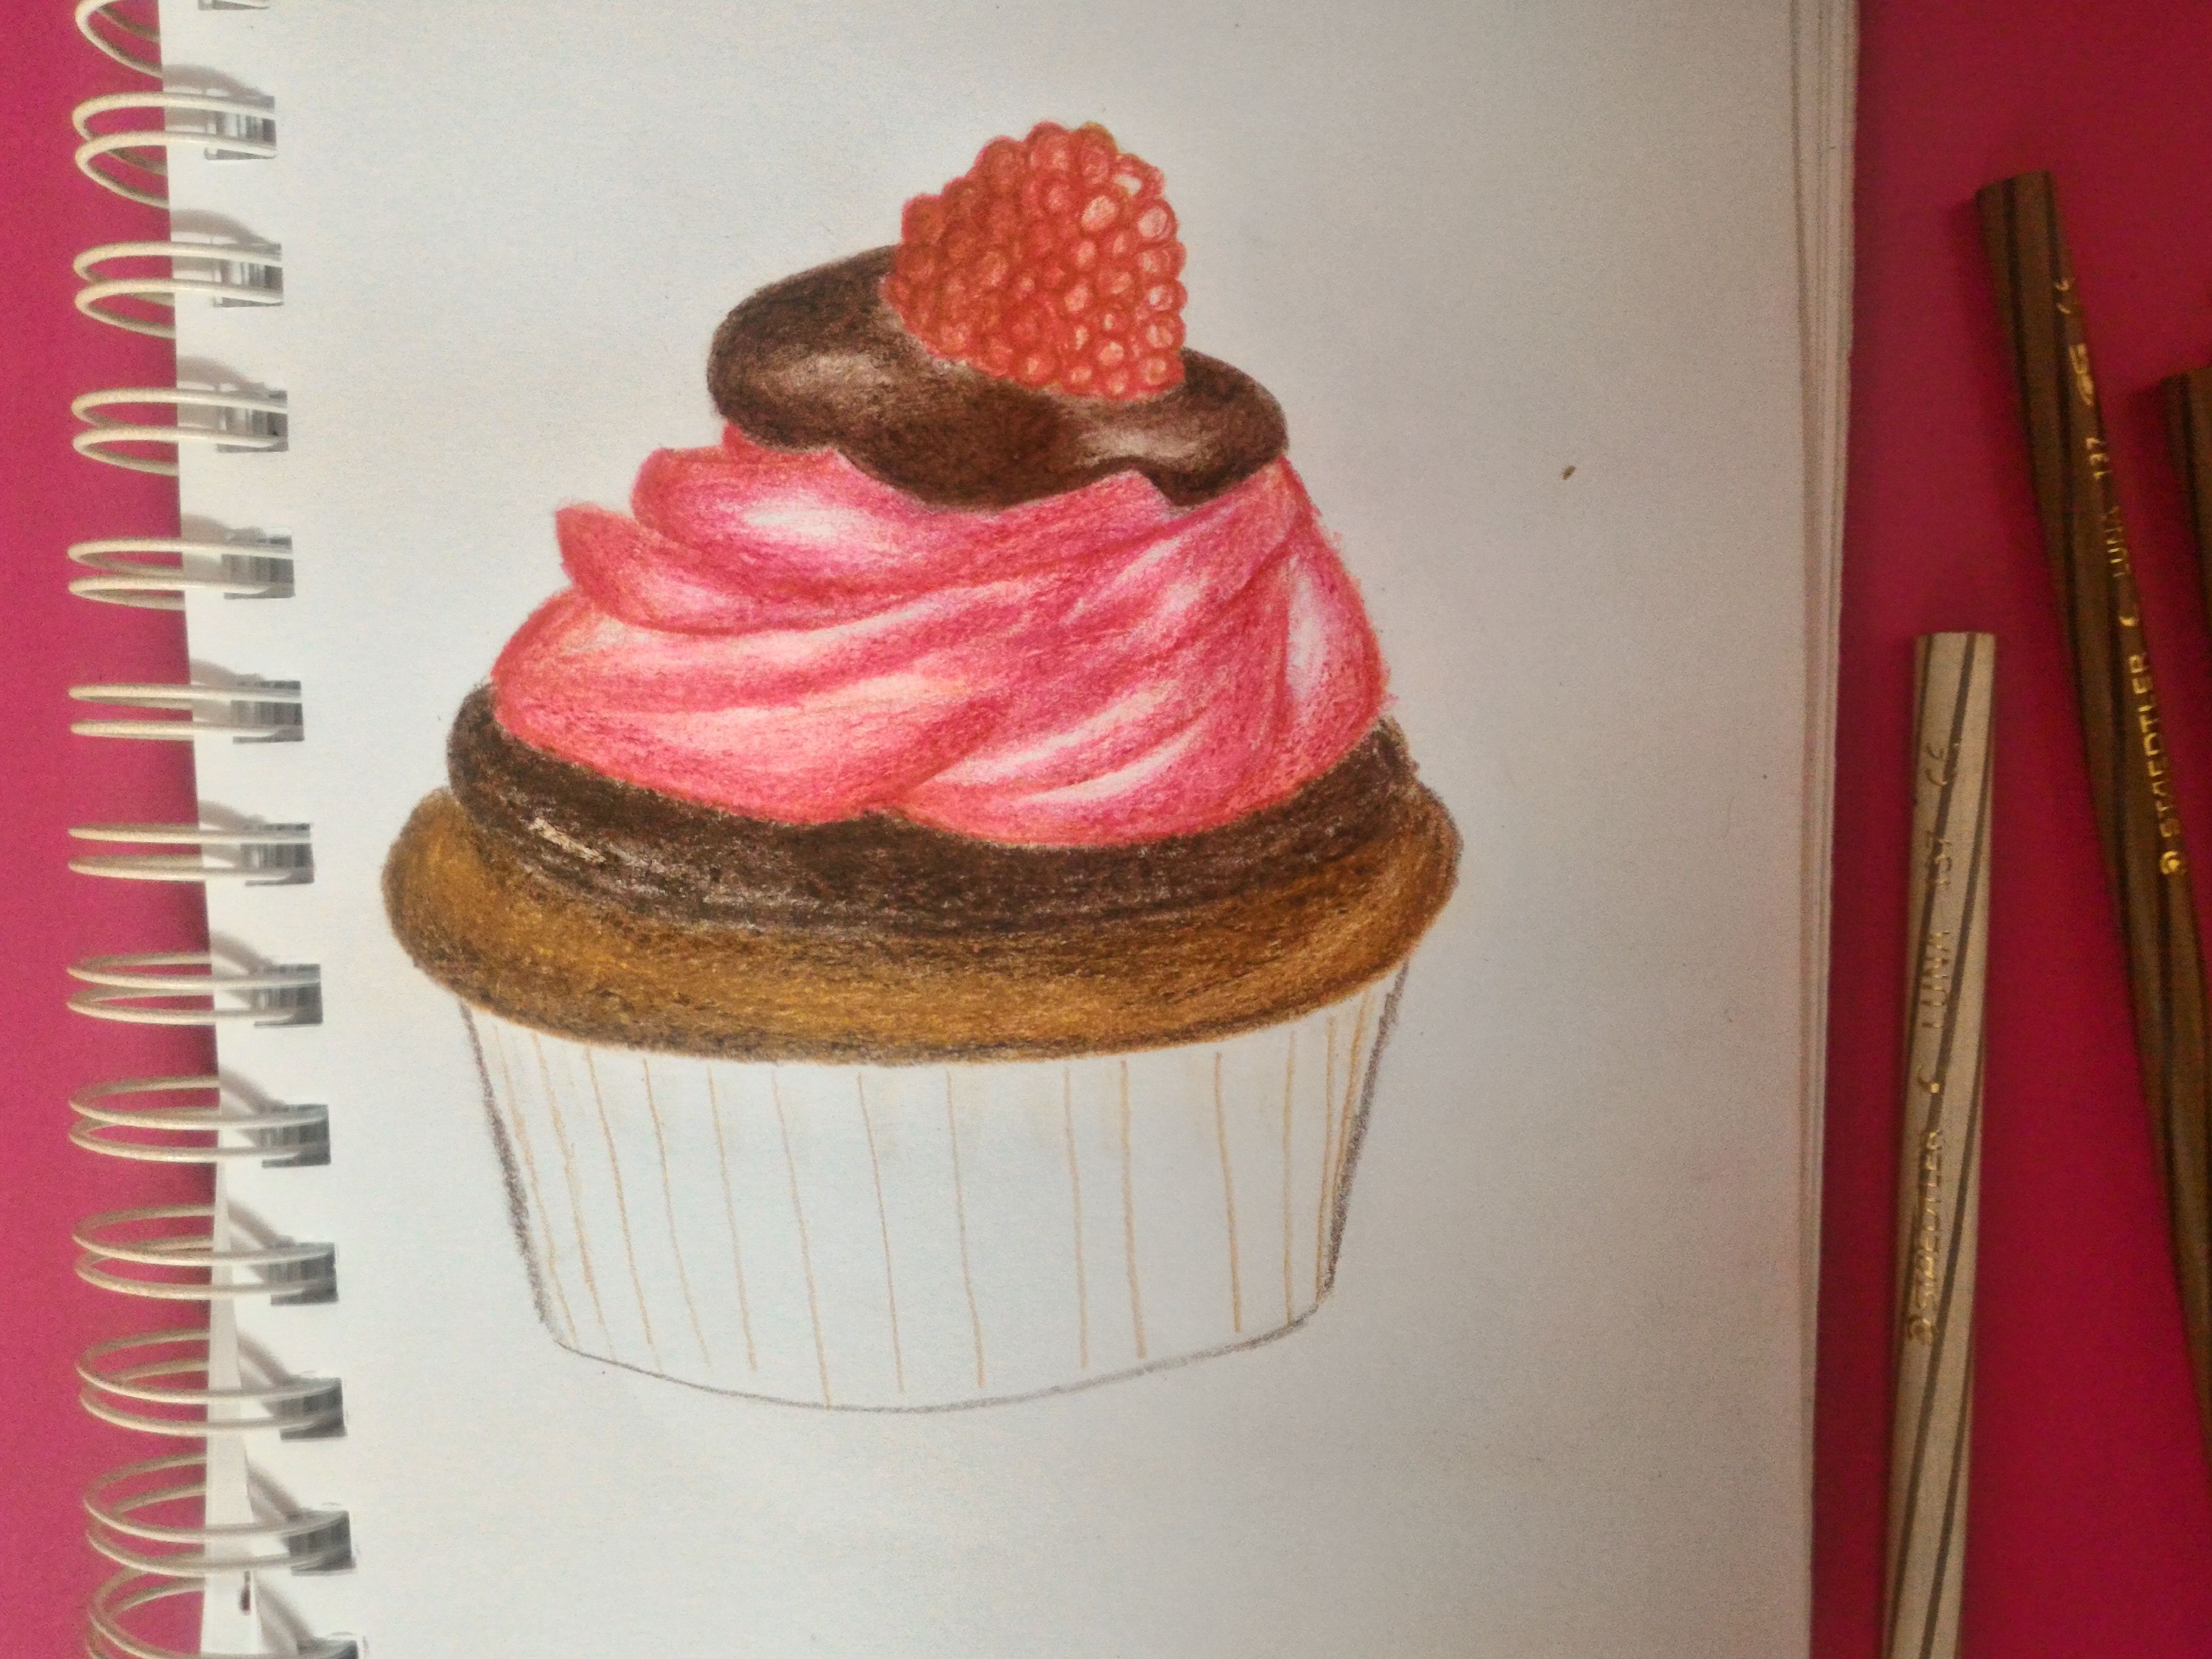 The Realistic Cupcake by ChompzillaG13 on DeviantArt